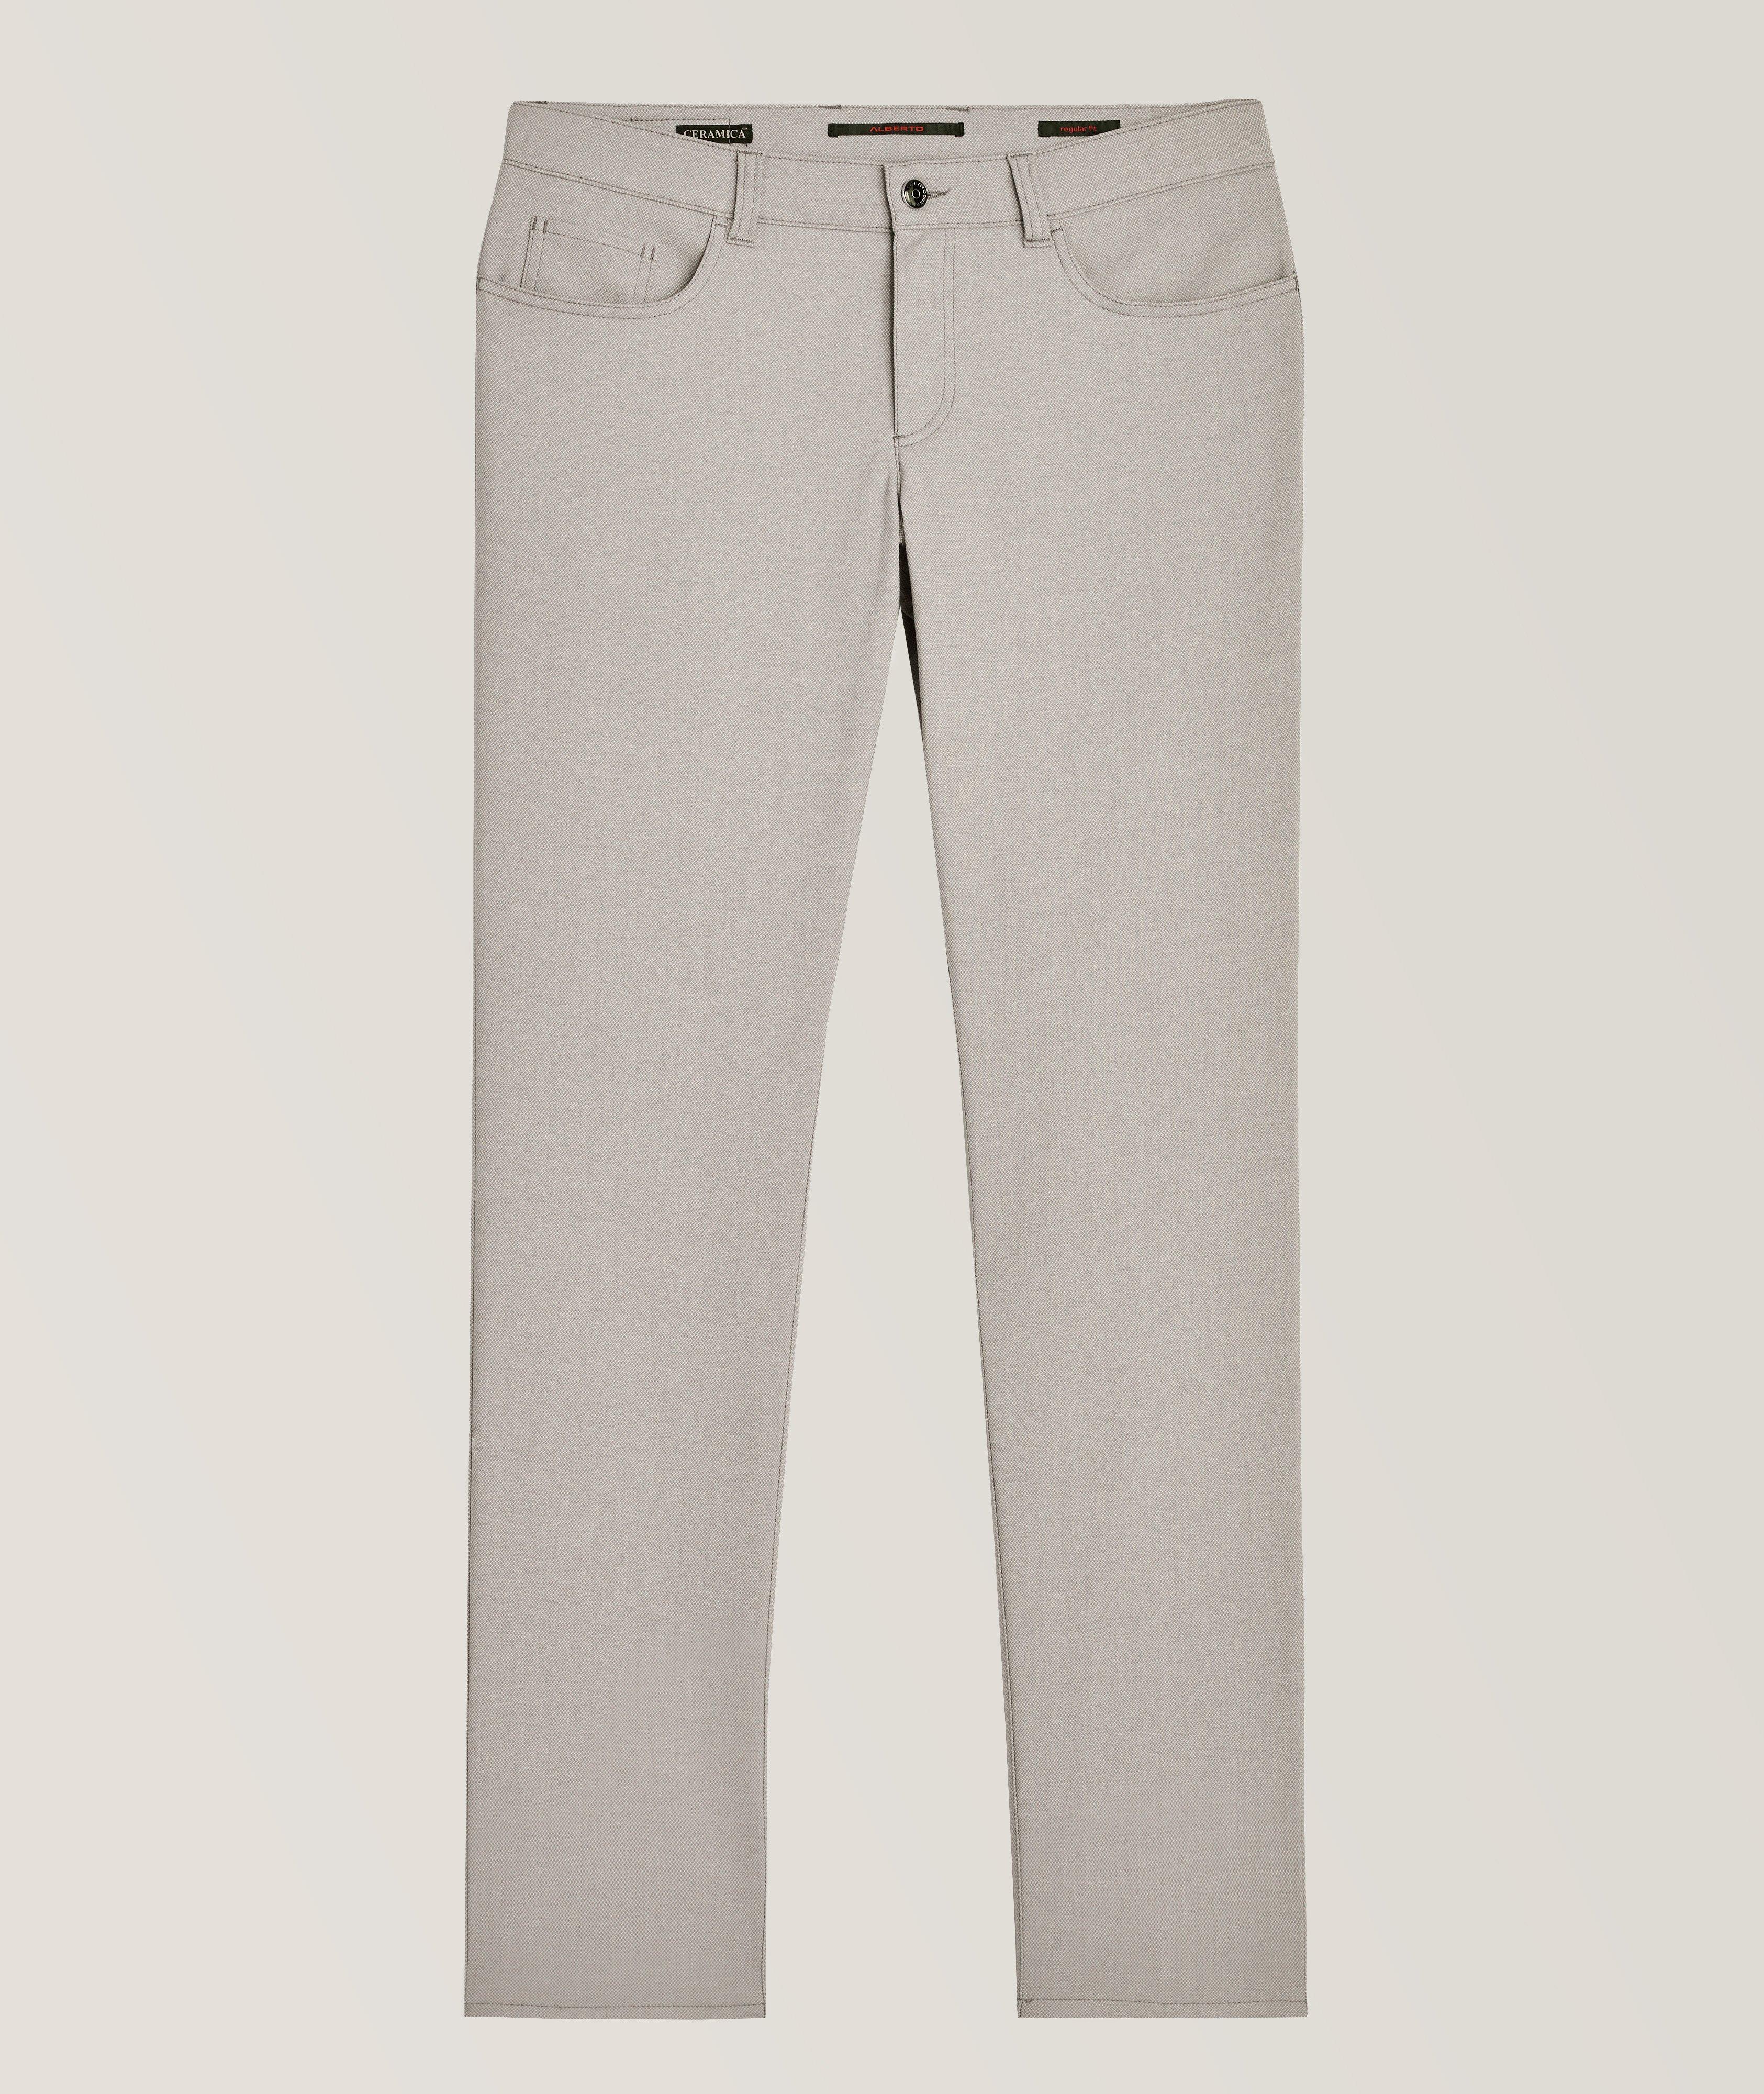 Pipe Two-Tone Textured Stretch-Fabric Pants image 0